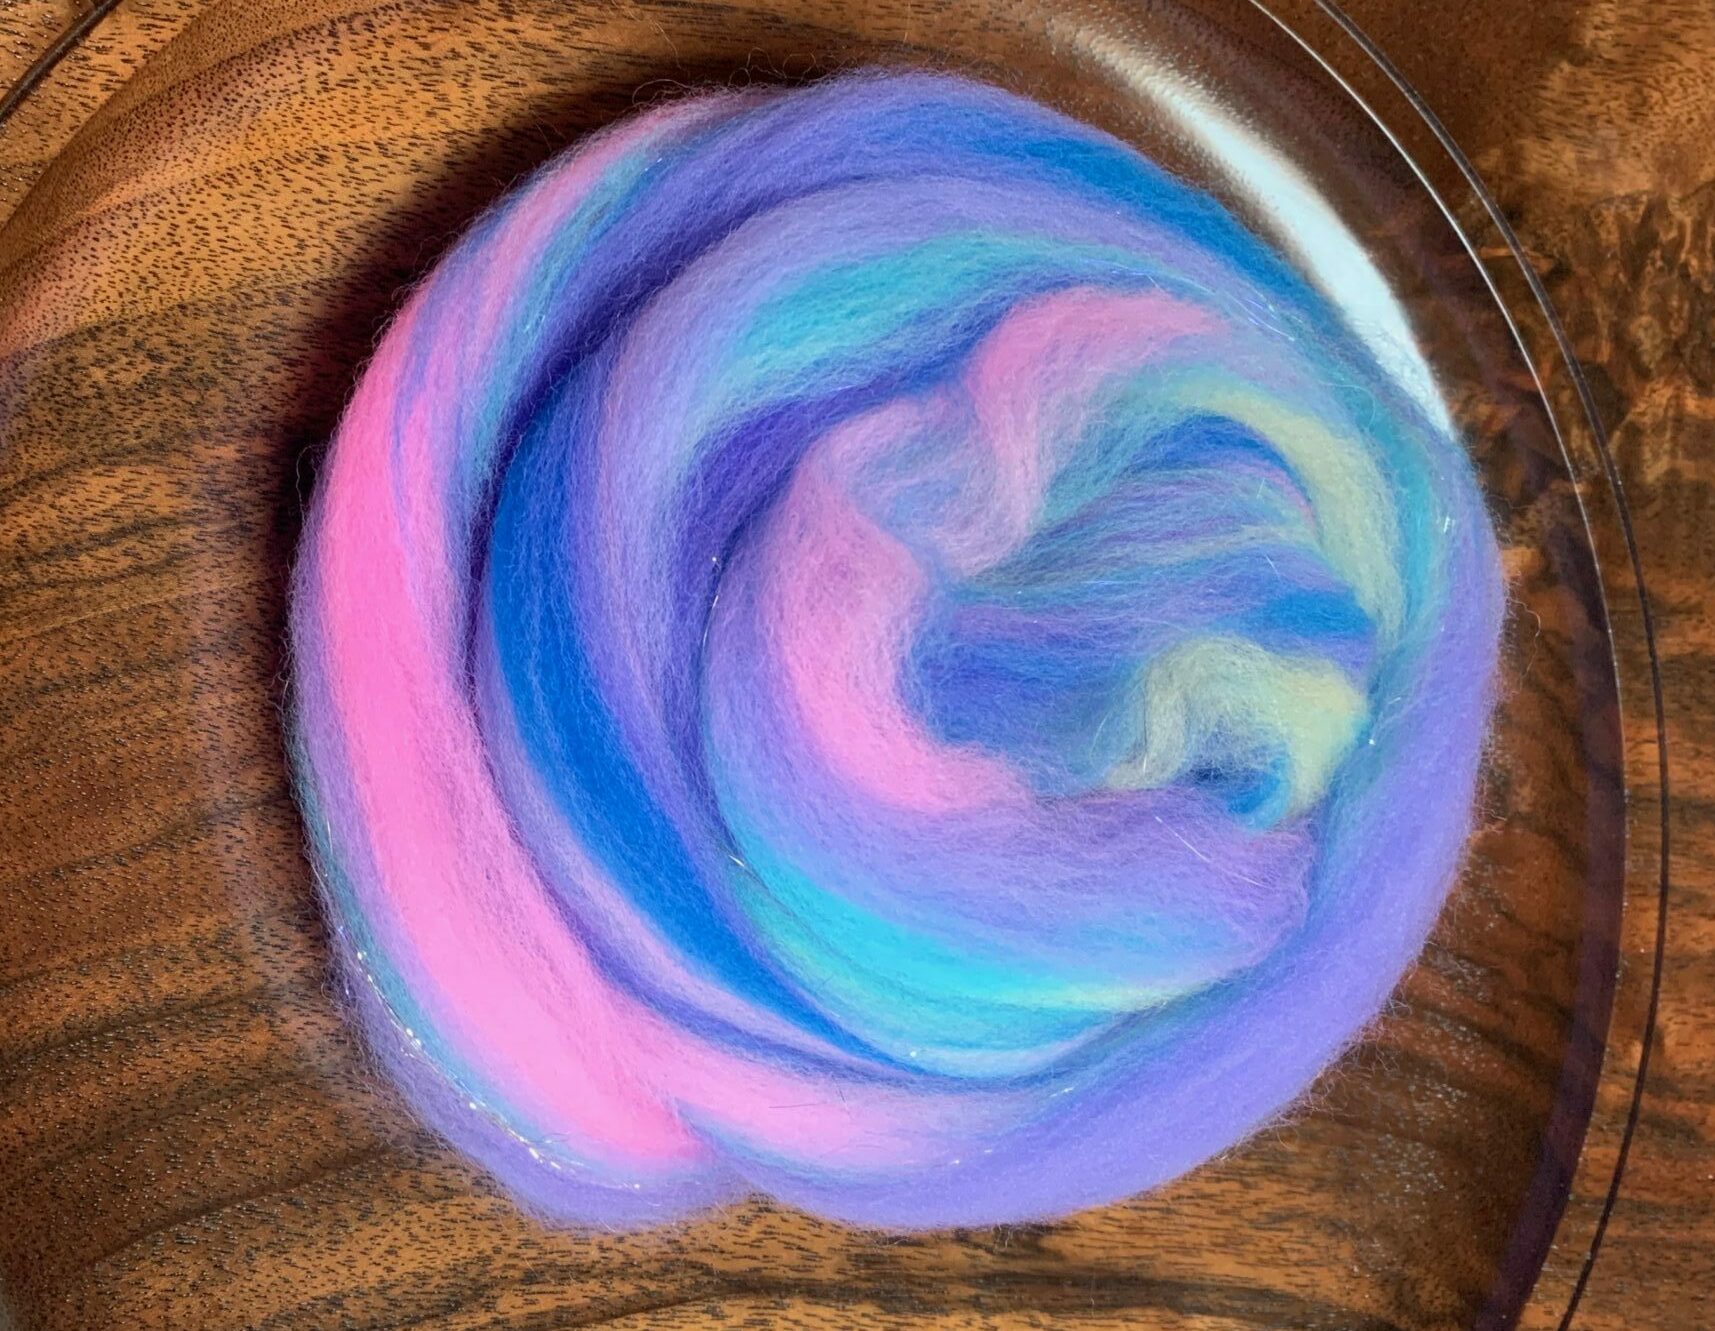 A nest (roving that's been coiled up until it looks like a nest) of the fiber described in the previous image. It's now a blend, so you can see repeating streaks of each color. It's set on a wooden platter that my partner made.